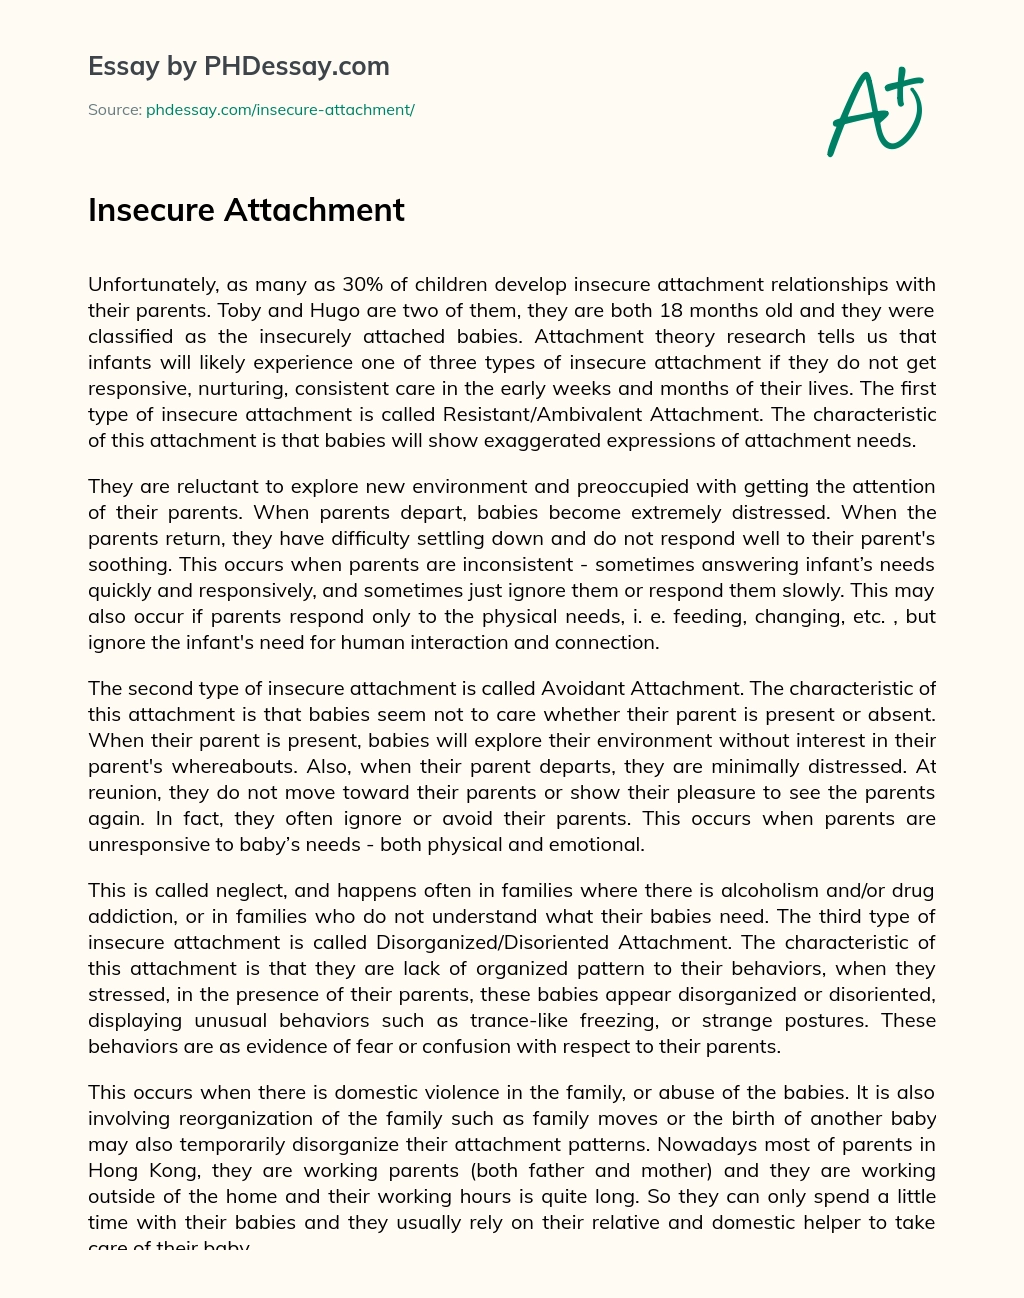 Insecure Attachment essay